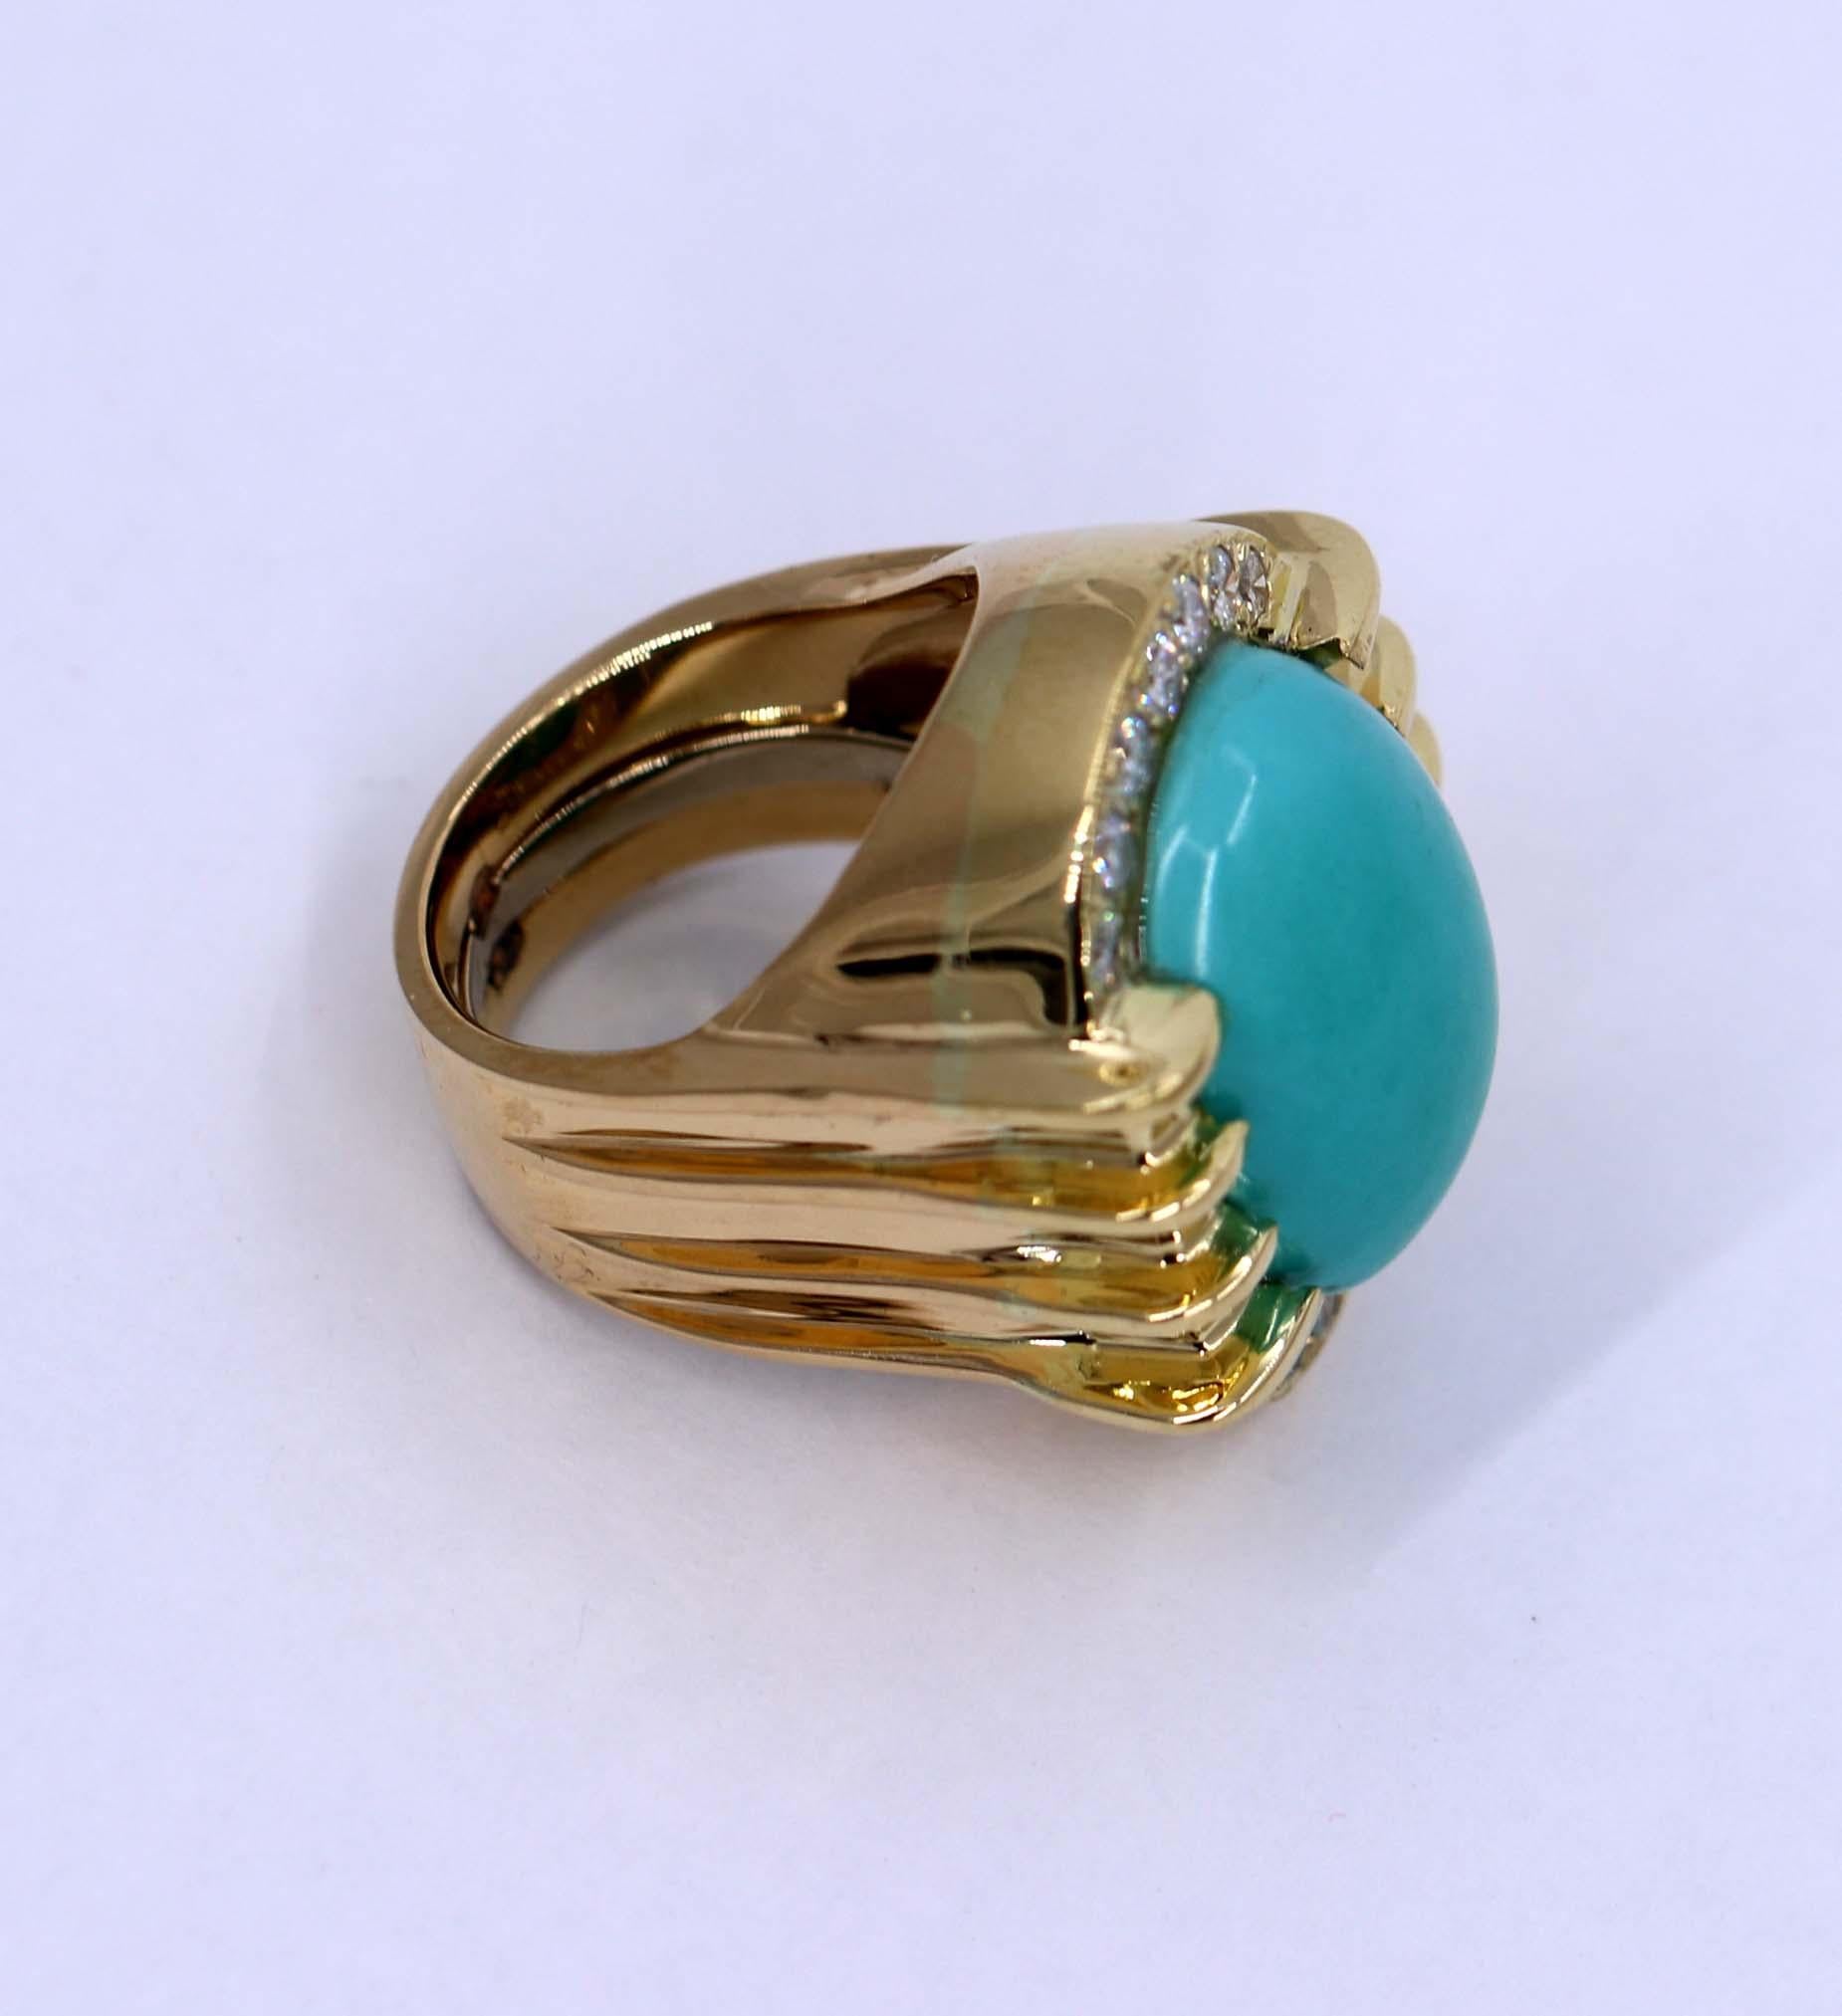 Brilliant Cut Classic Styled Gold Ring with Turquoise and Diamonds